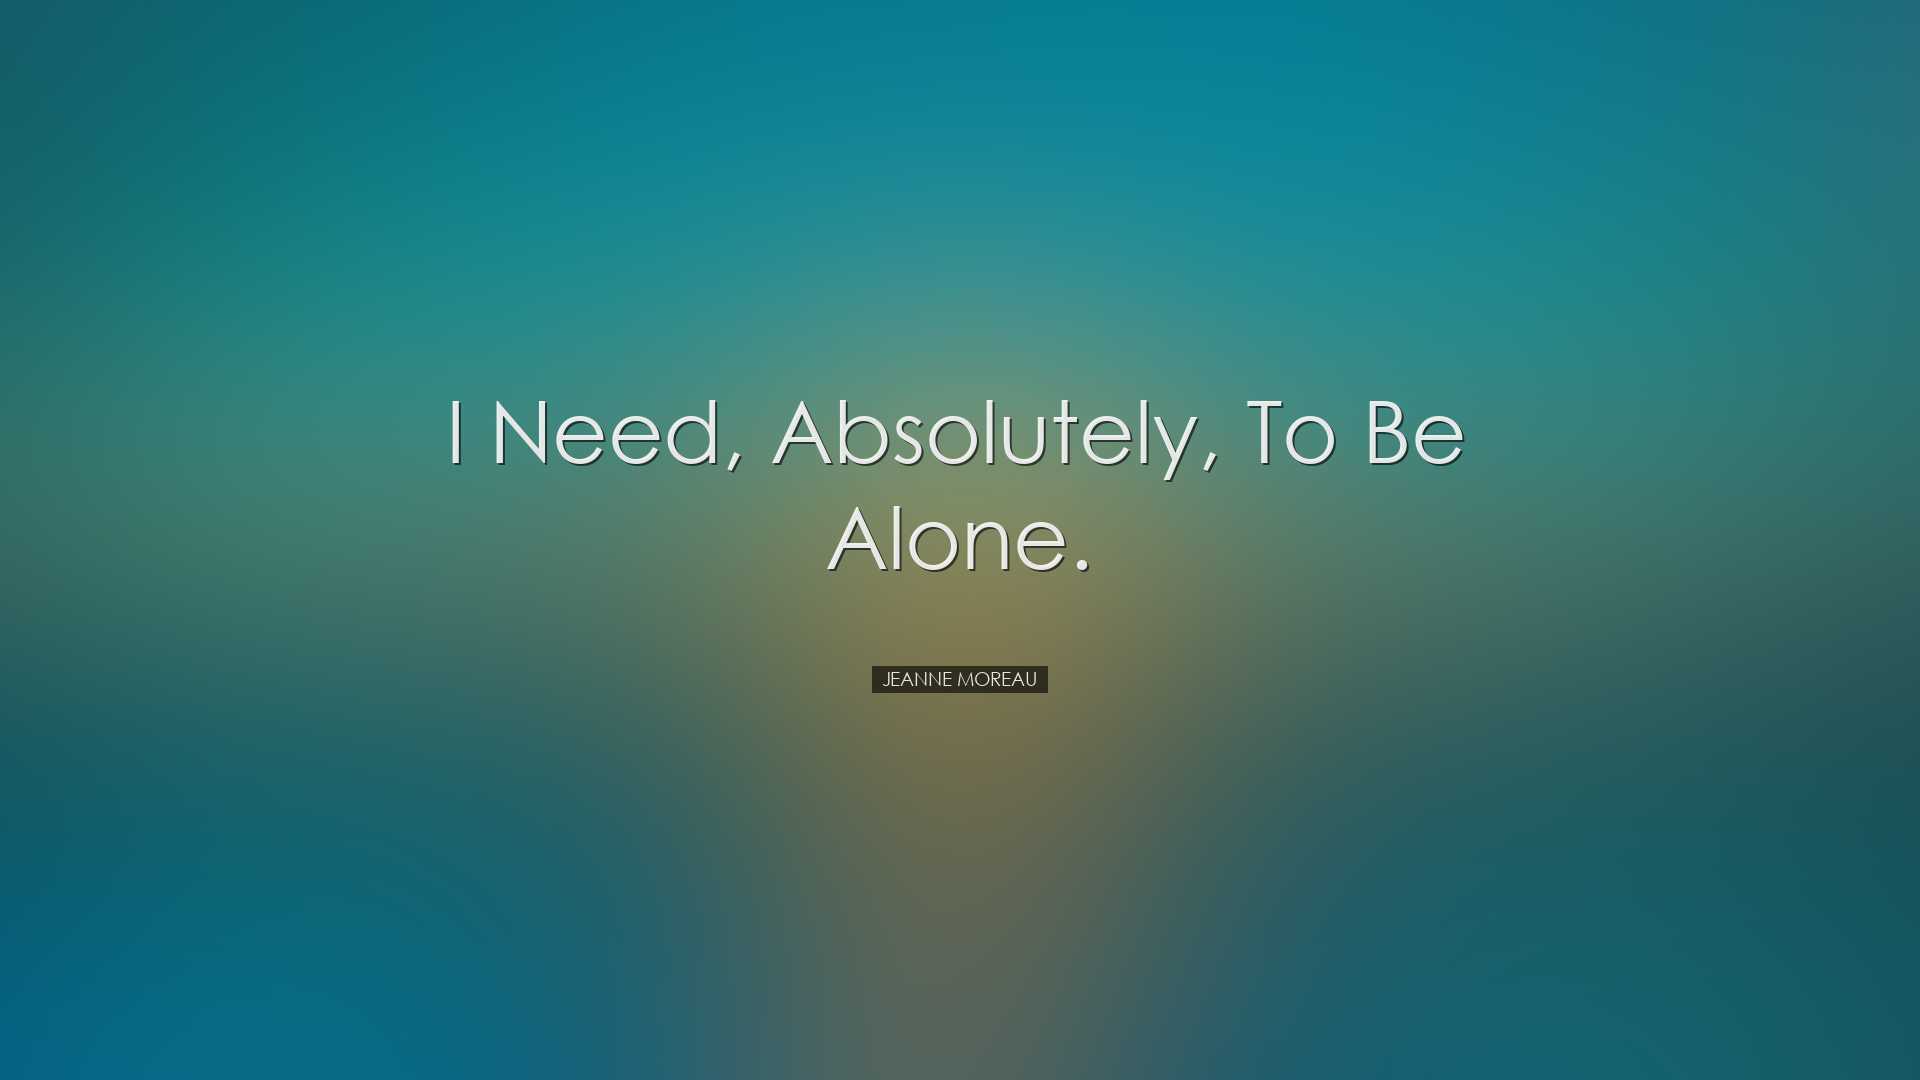 I need, absolutely, to be alone. - Jeanne Moreau